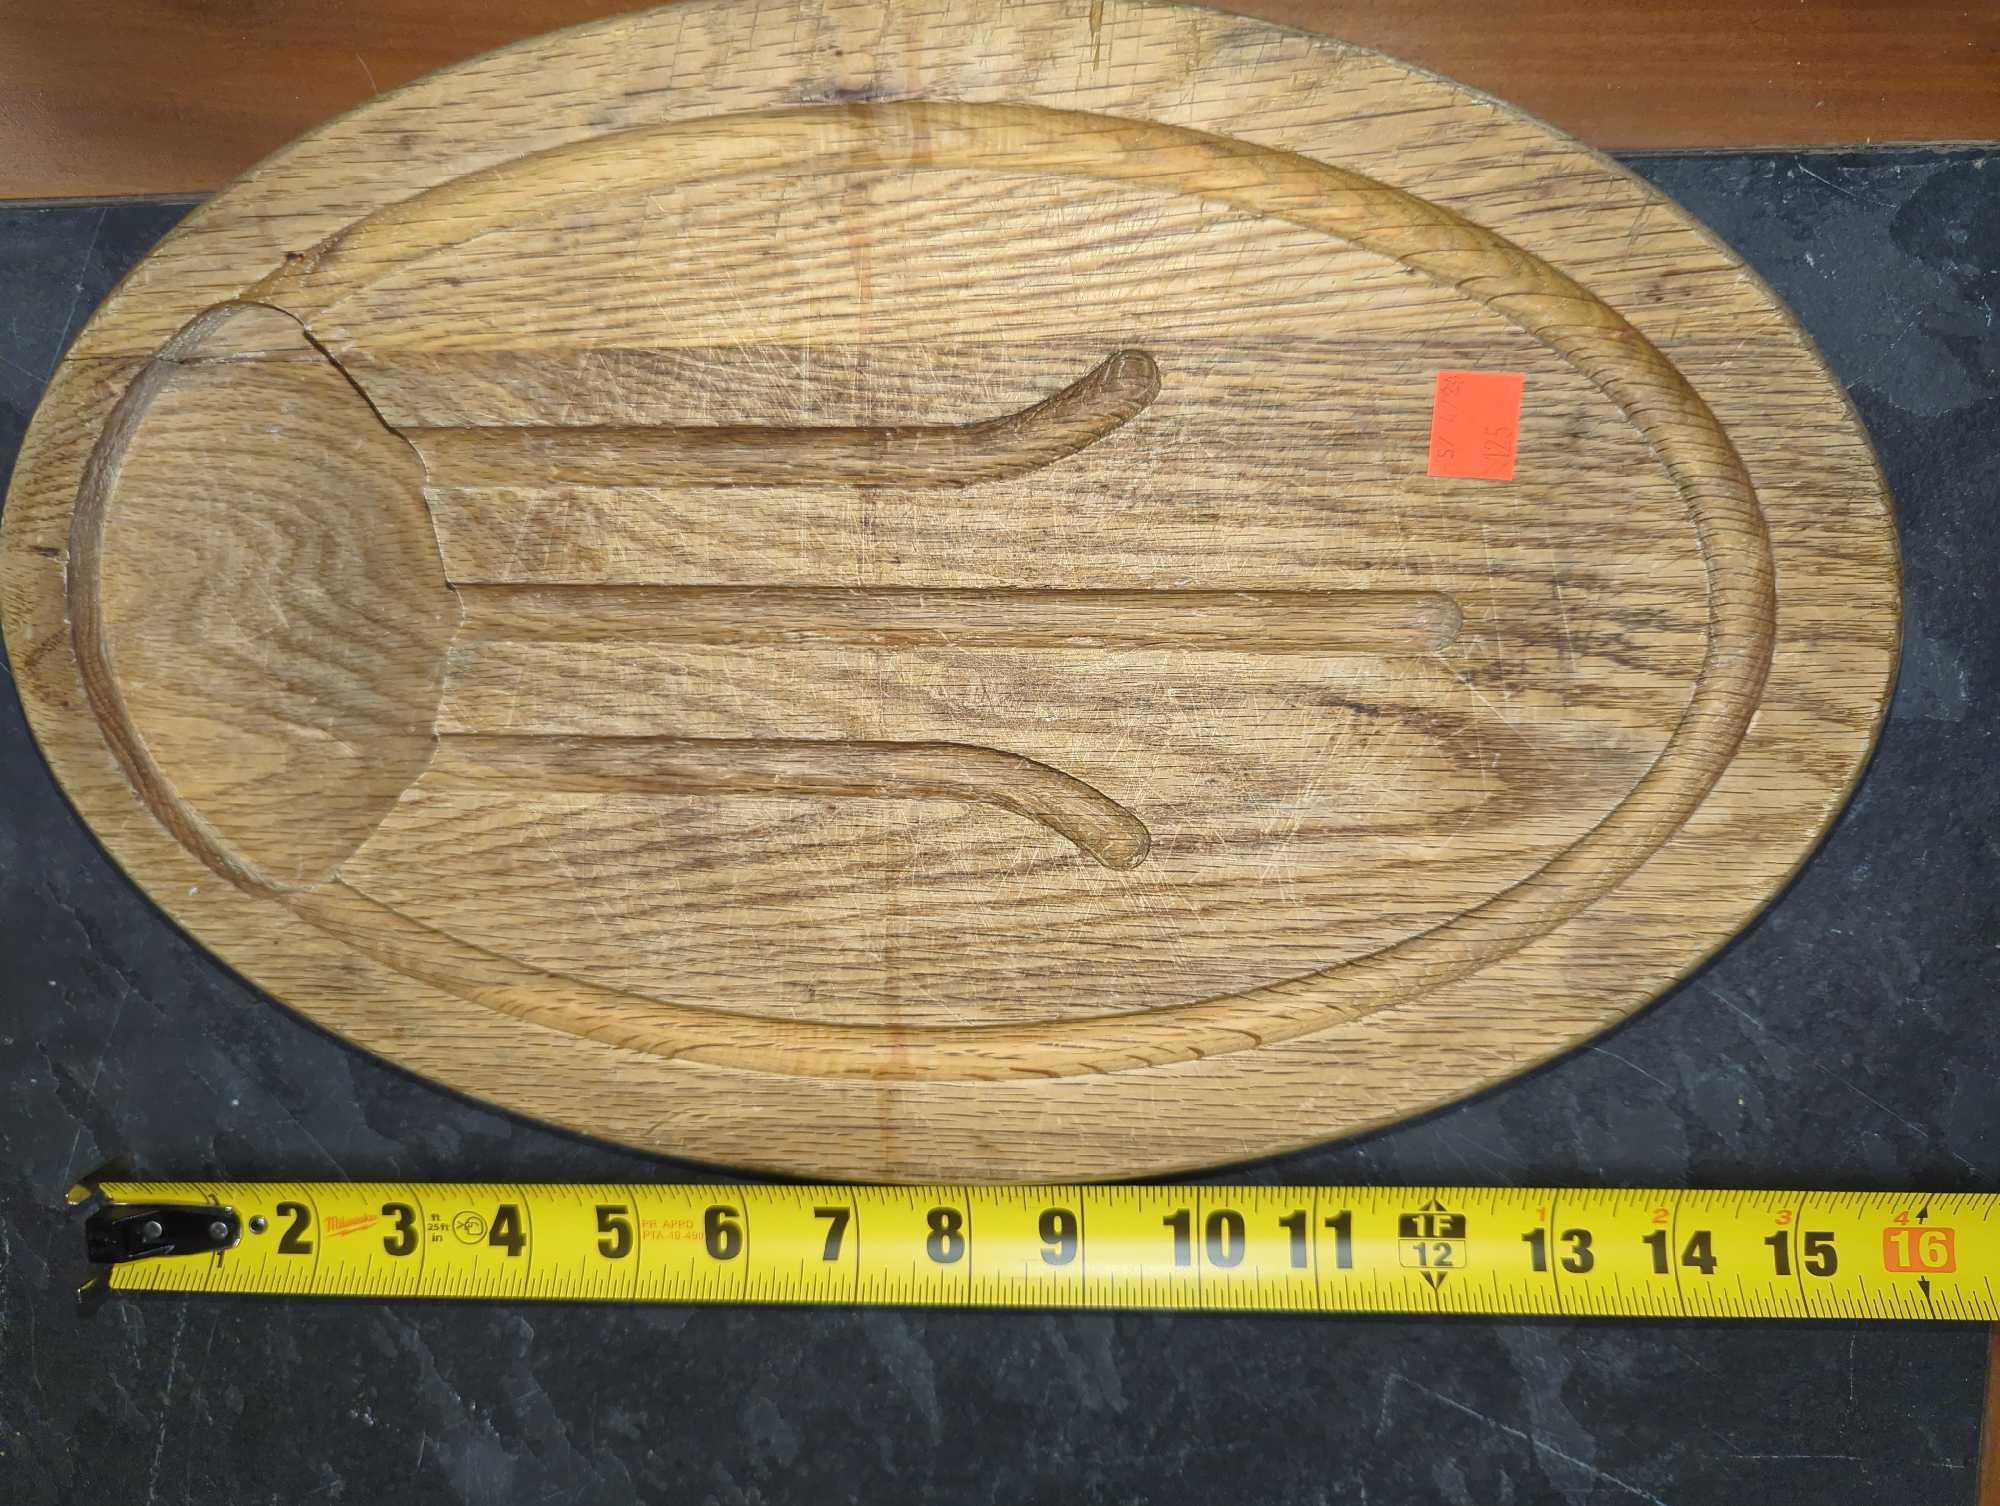 Basket Lot of 10 Assorted Cutting Boards, Wood and Marble, What You See in the Photos is Exactly